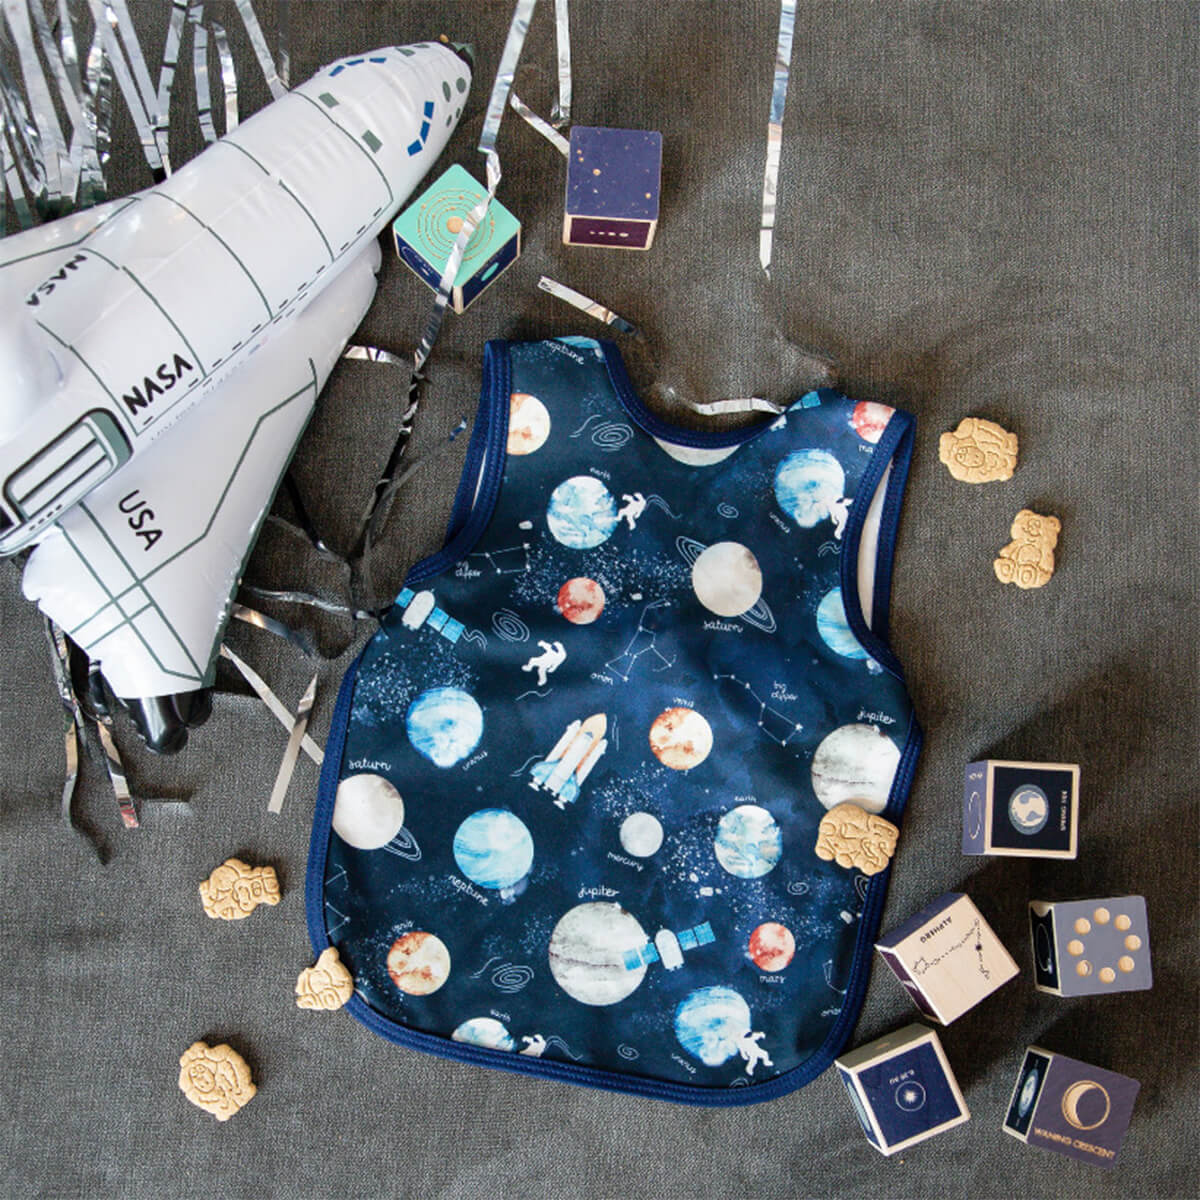 BapronBaby® Bapron in Outer Space / Bib + Apron That Safely Ties Around the Body